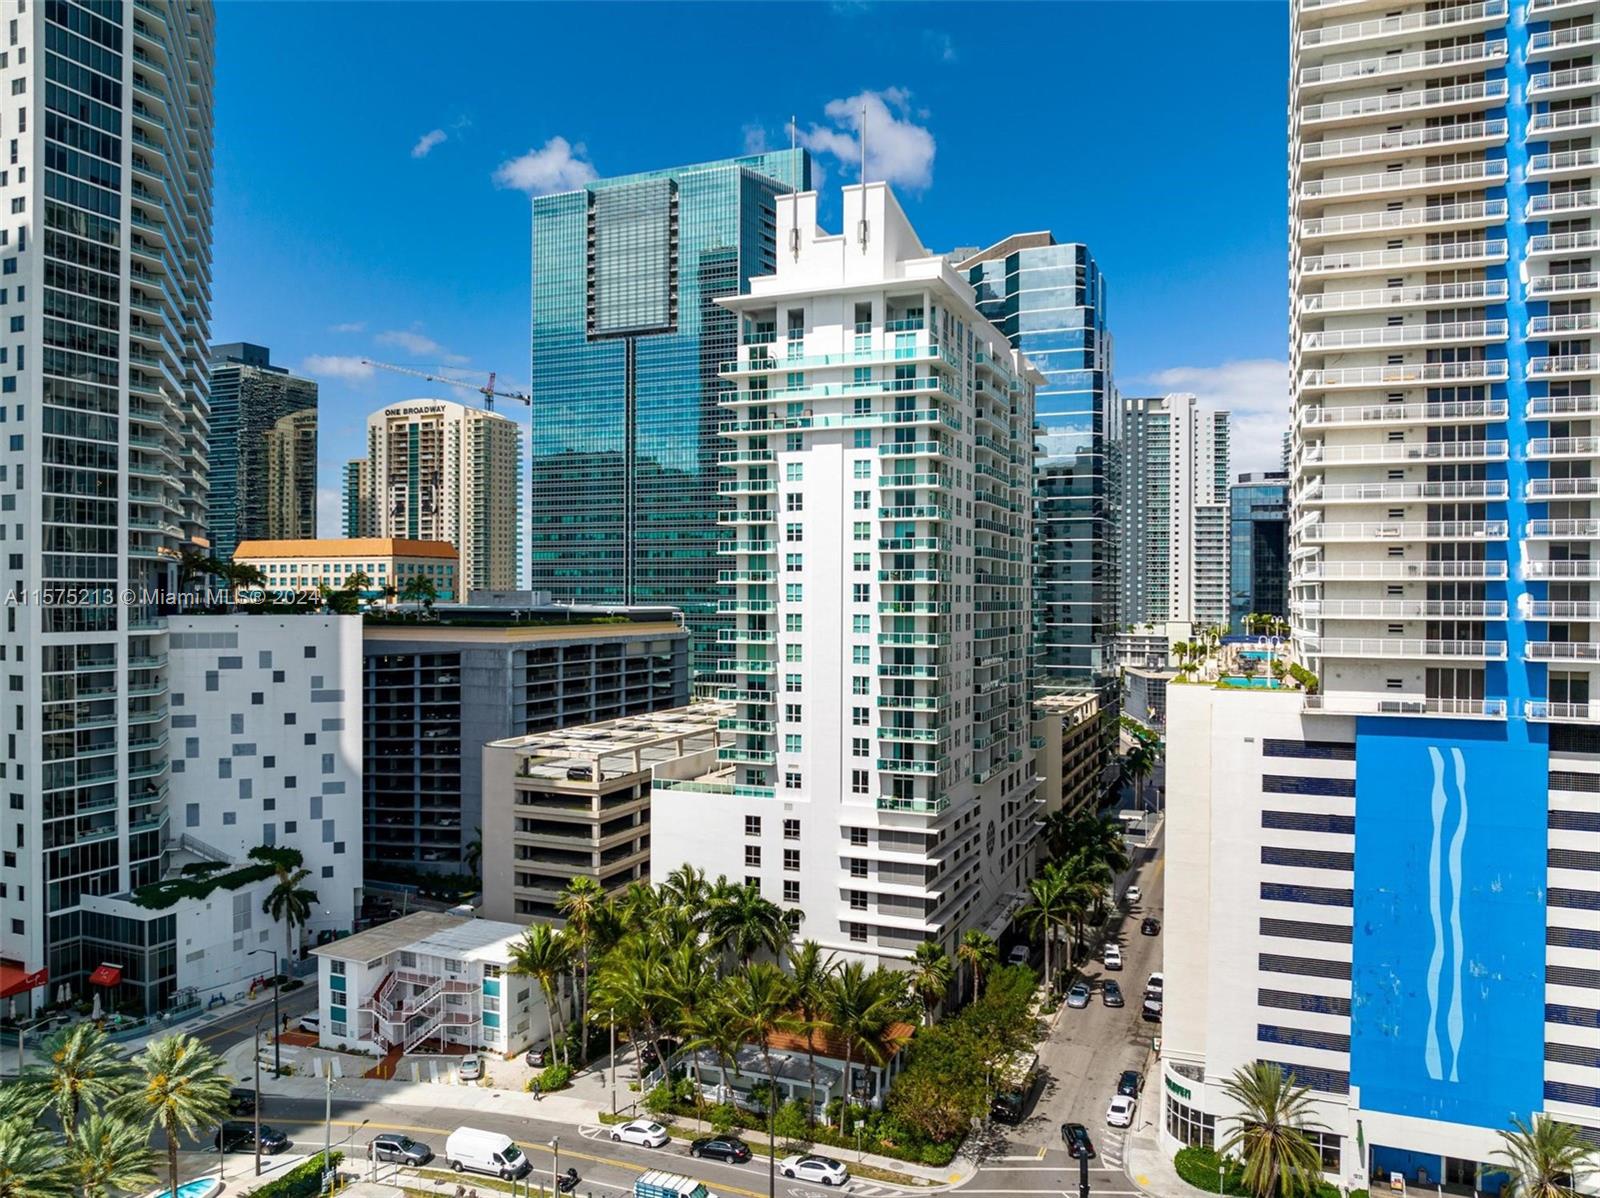 Look no further for the perfect location in Brickell. Smacked in the center of the financial district and all the action,
Solaris, a boutique building offers top of the line amenities: high tech fitness center, landscaped sundeck with
swimming pool, relaxing whirlpool spa & lava rock sauna, Clubhouse has bar, pool table & estate of the art
entertainment center. Concierge, 24 hour security and valet. Unit features marble floors, impeccable conditions,
functional layout, impressive city & water views.